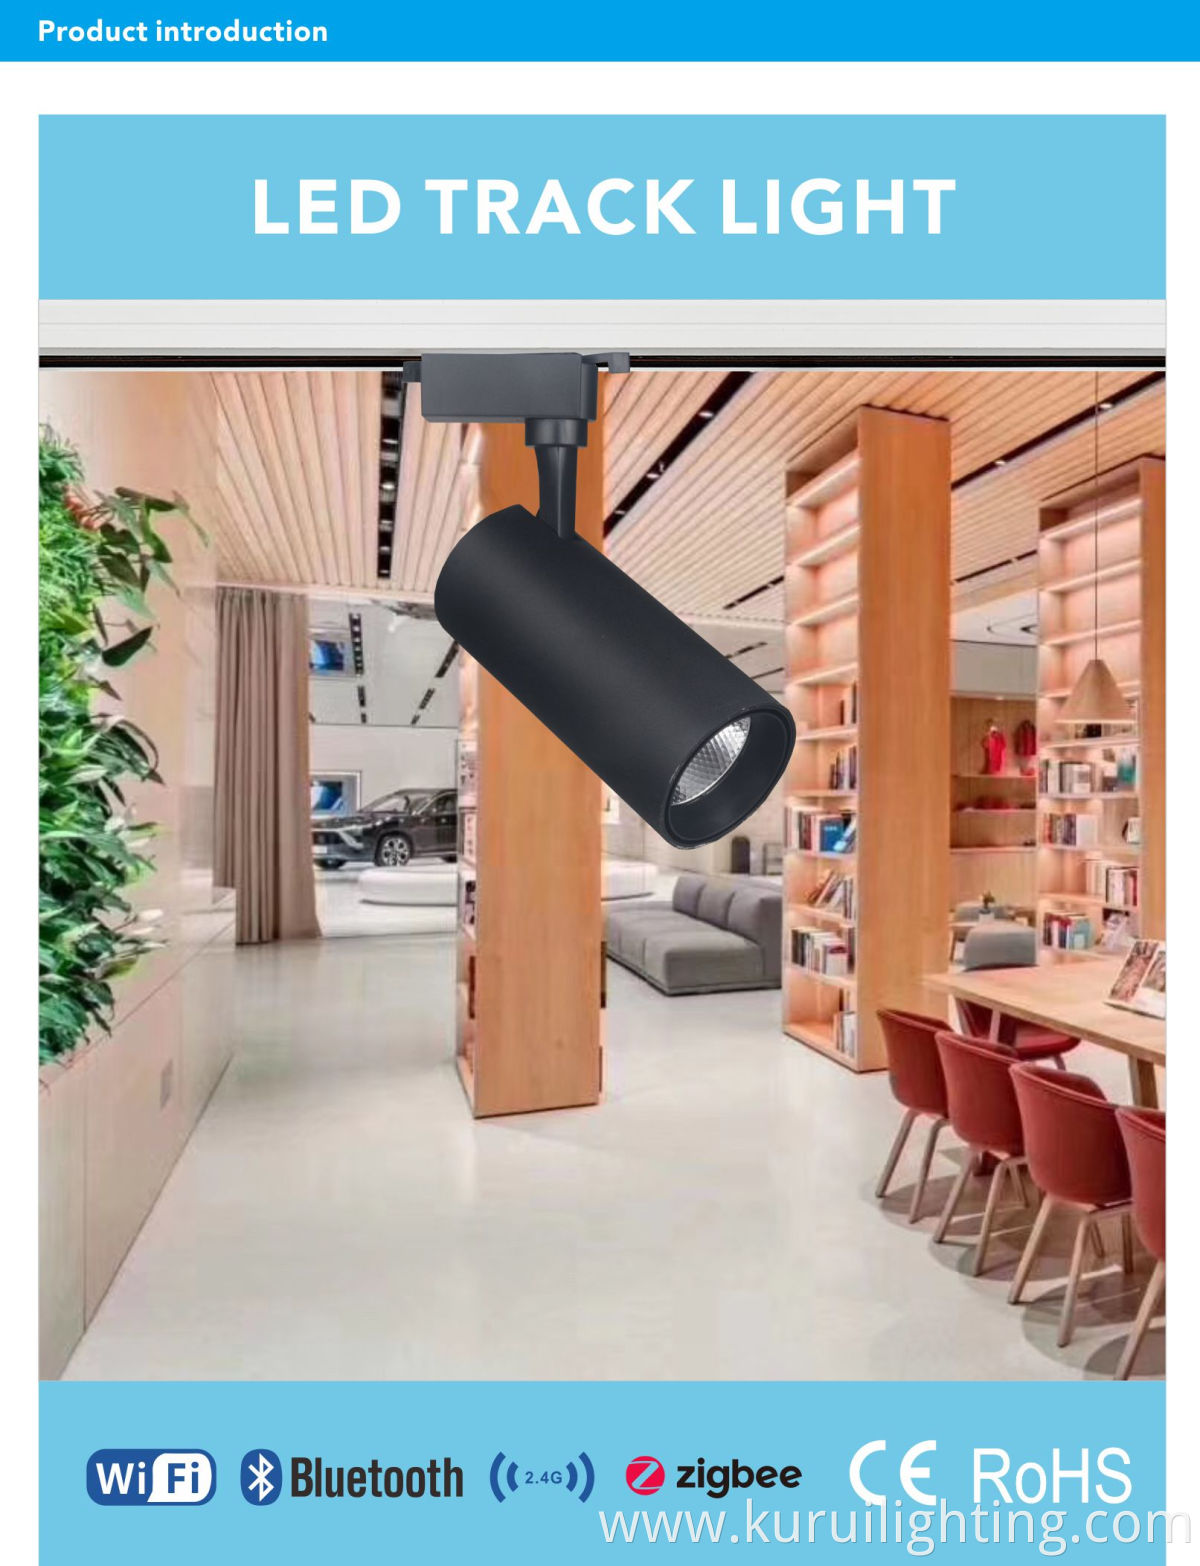 Hot sales competitive low price Wholesales Retail 20W COB 2 wires 3 Wires indoor Non-isolated Constant Current LED Track light